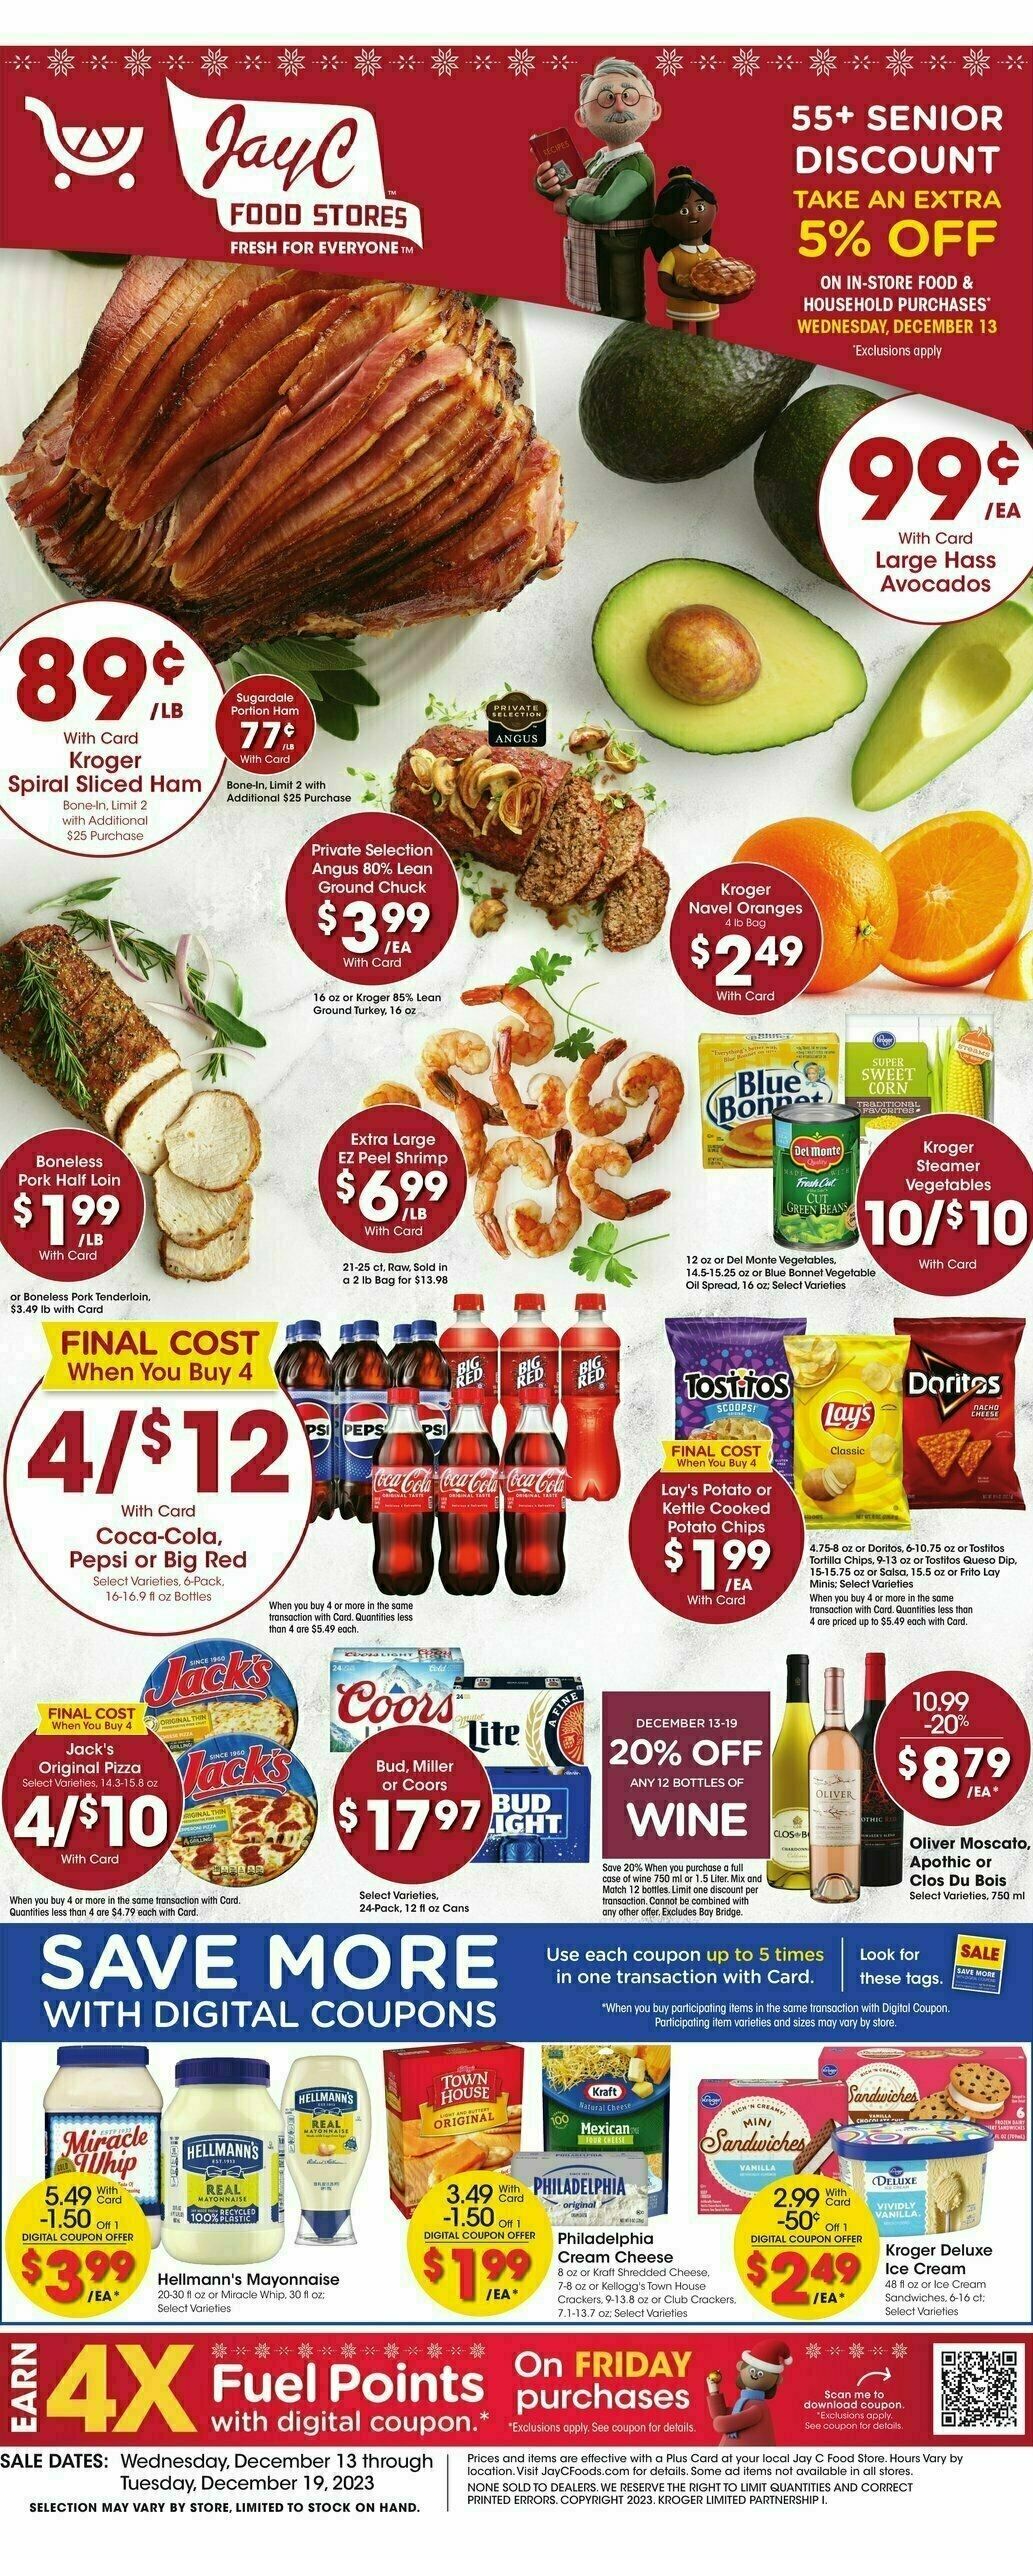 Jay C Food Weekly Ad from December 13